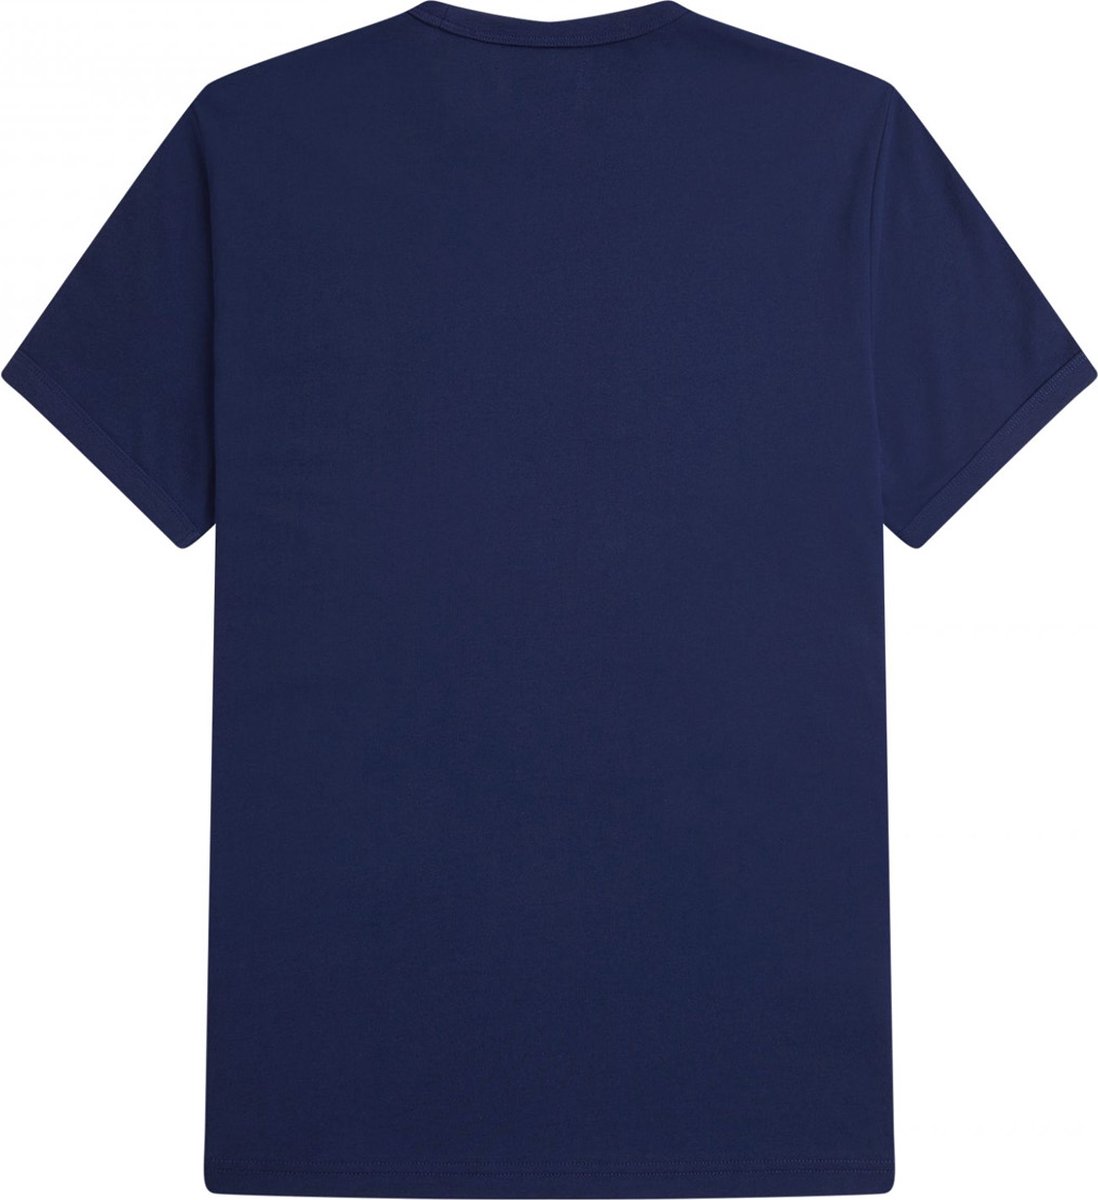 Fred Perry - Ringer T-Shirt - Donkerblauw T-Shirt-M